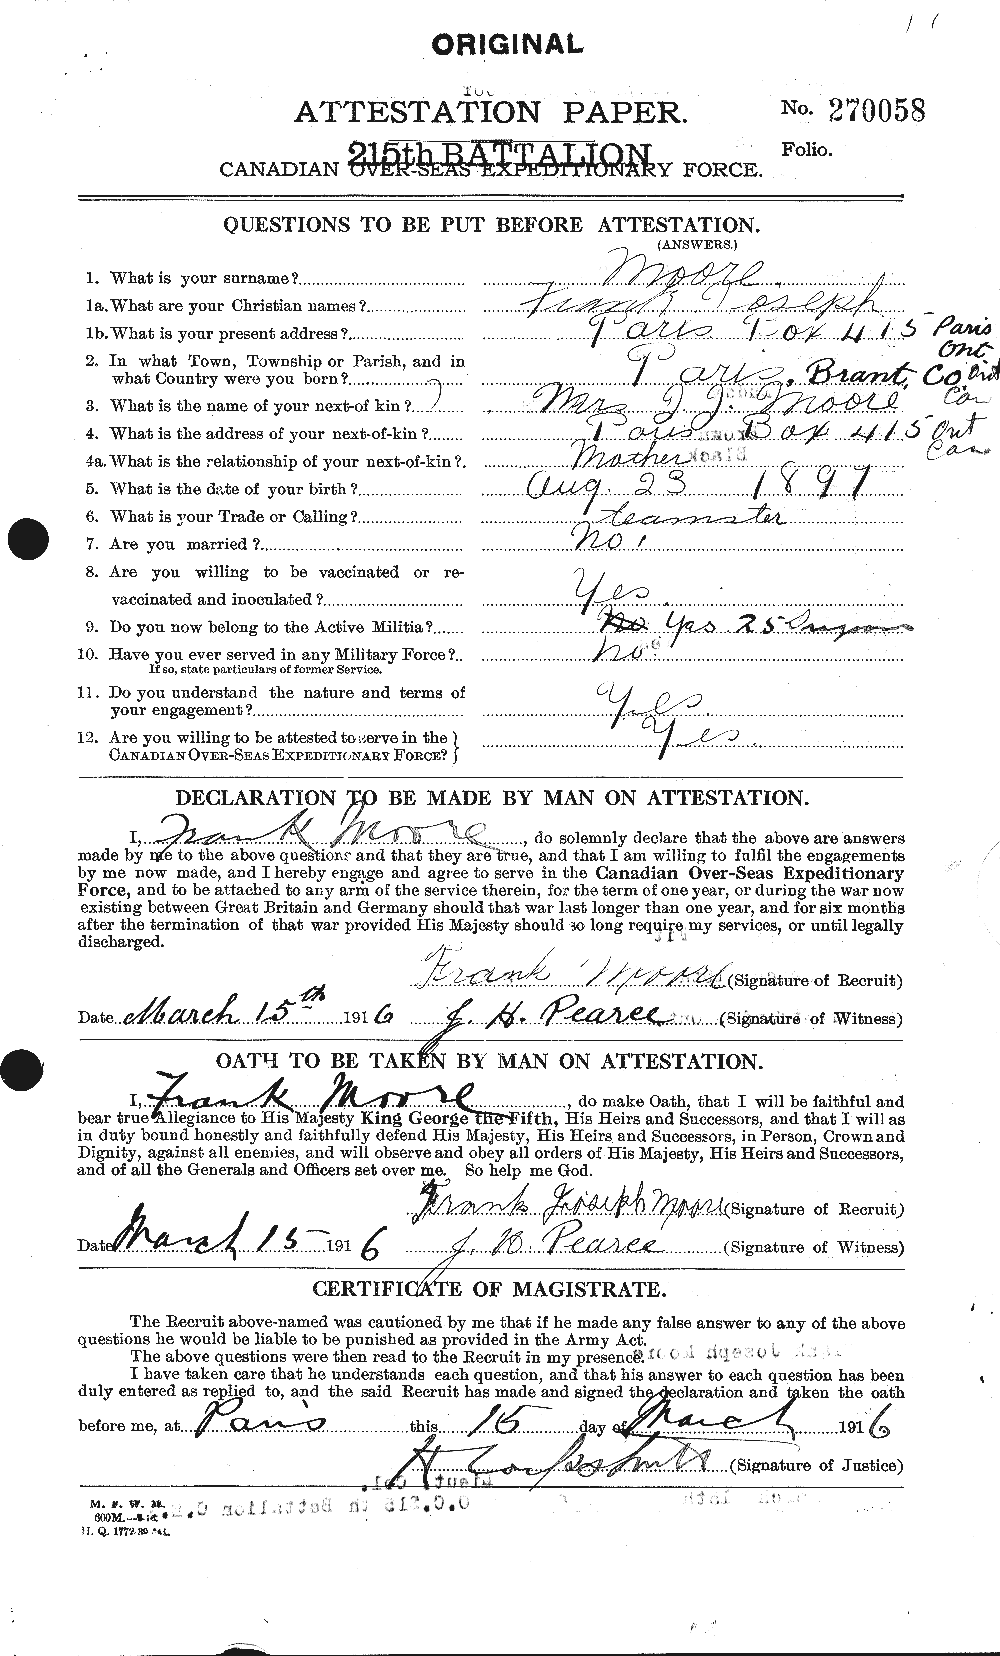 Personnel Records of the First World War - CEF 506706a